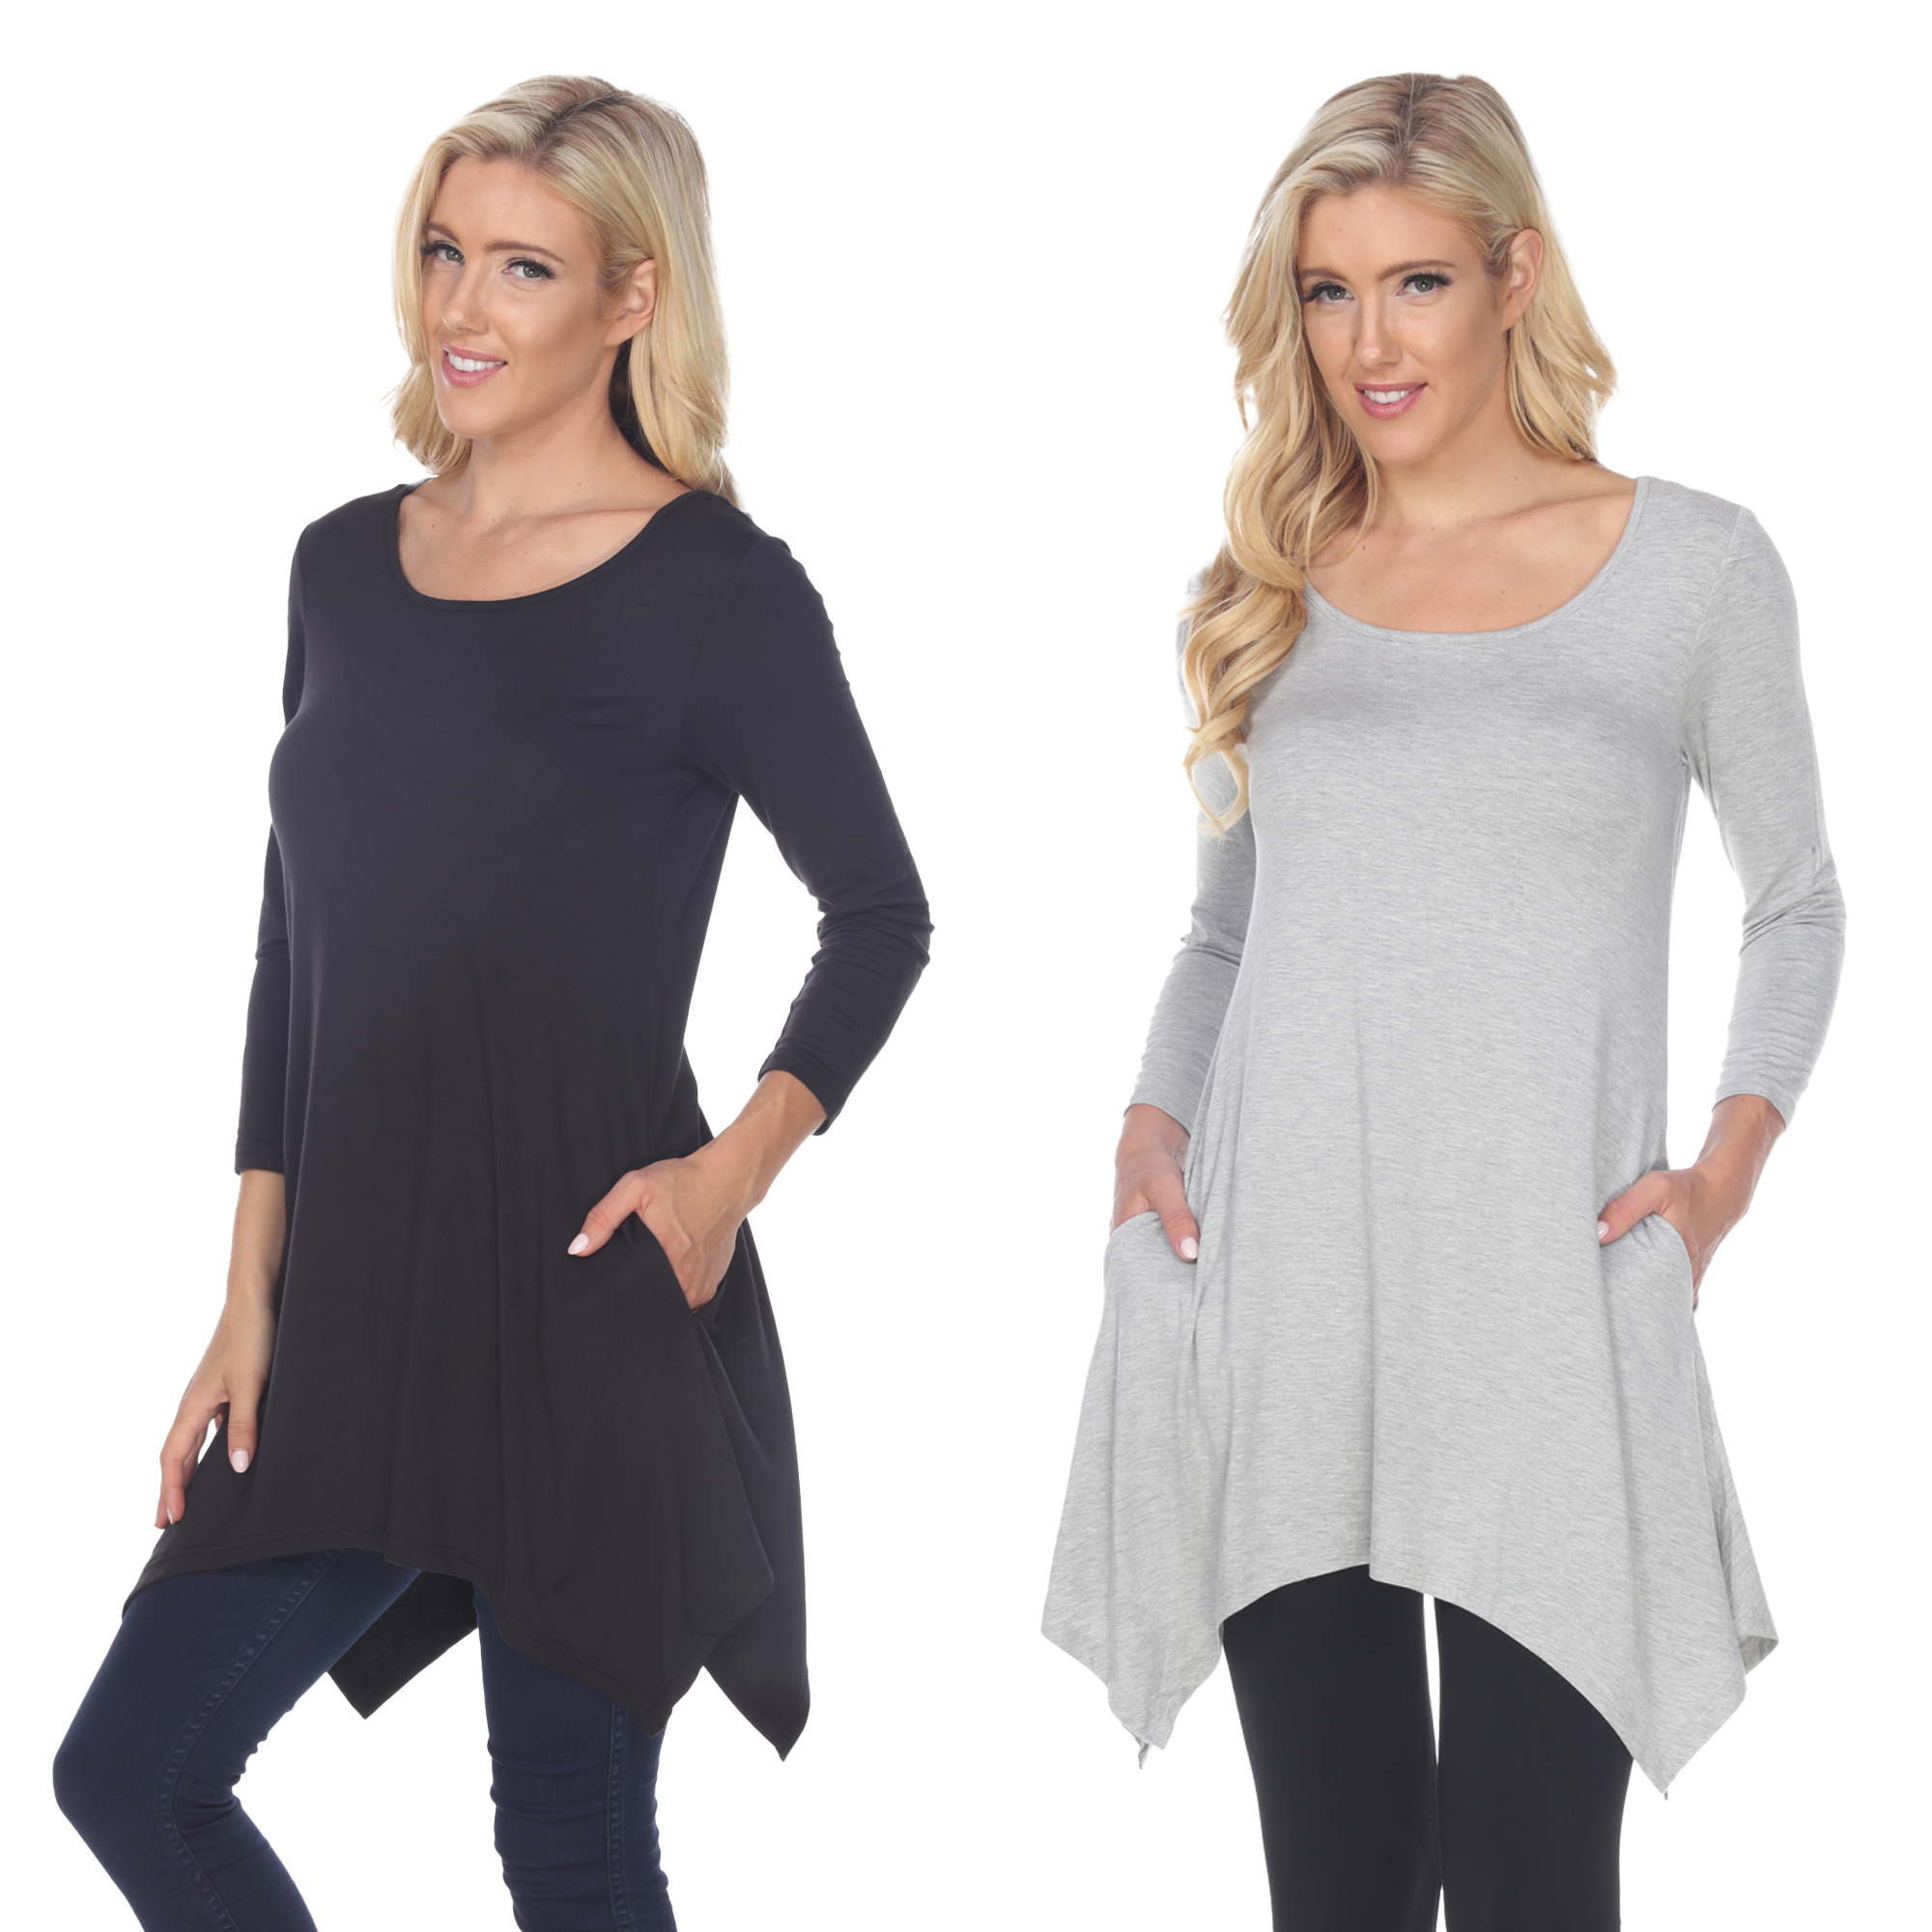 White Mark Women's Pack Of 2 Black Tunic Top - Black, Heather Grey, Small